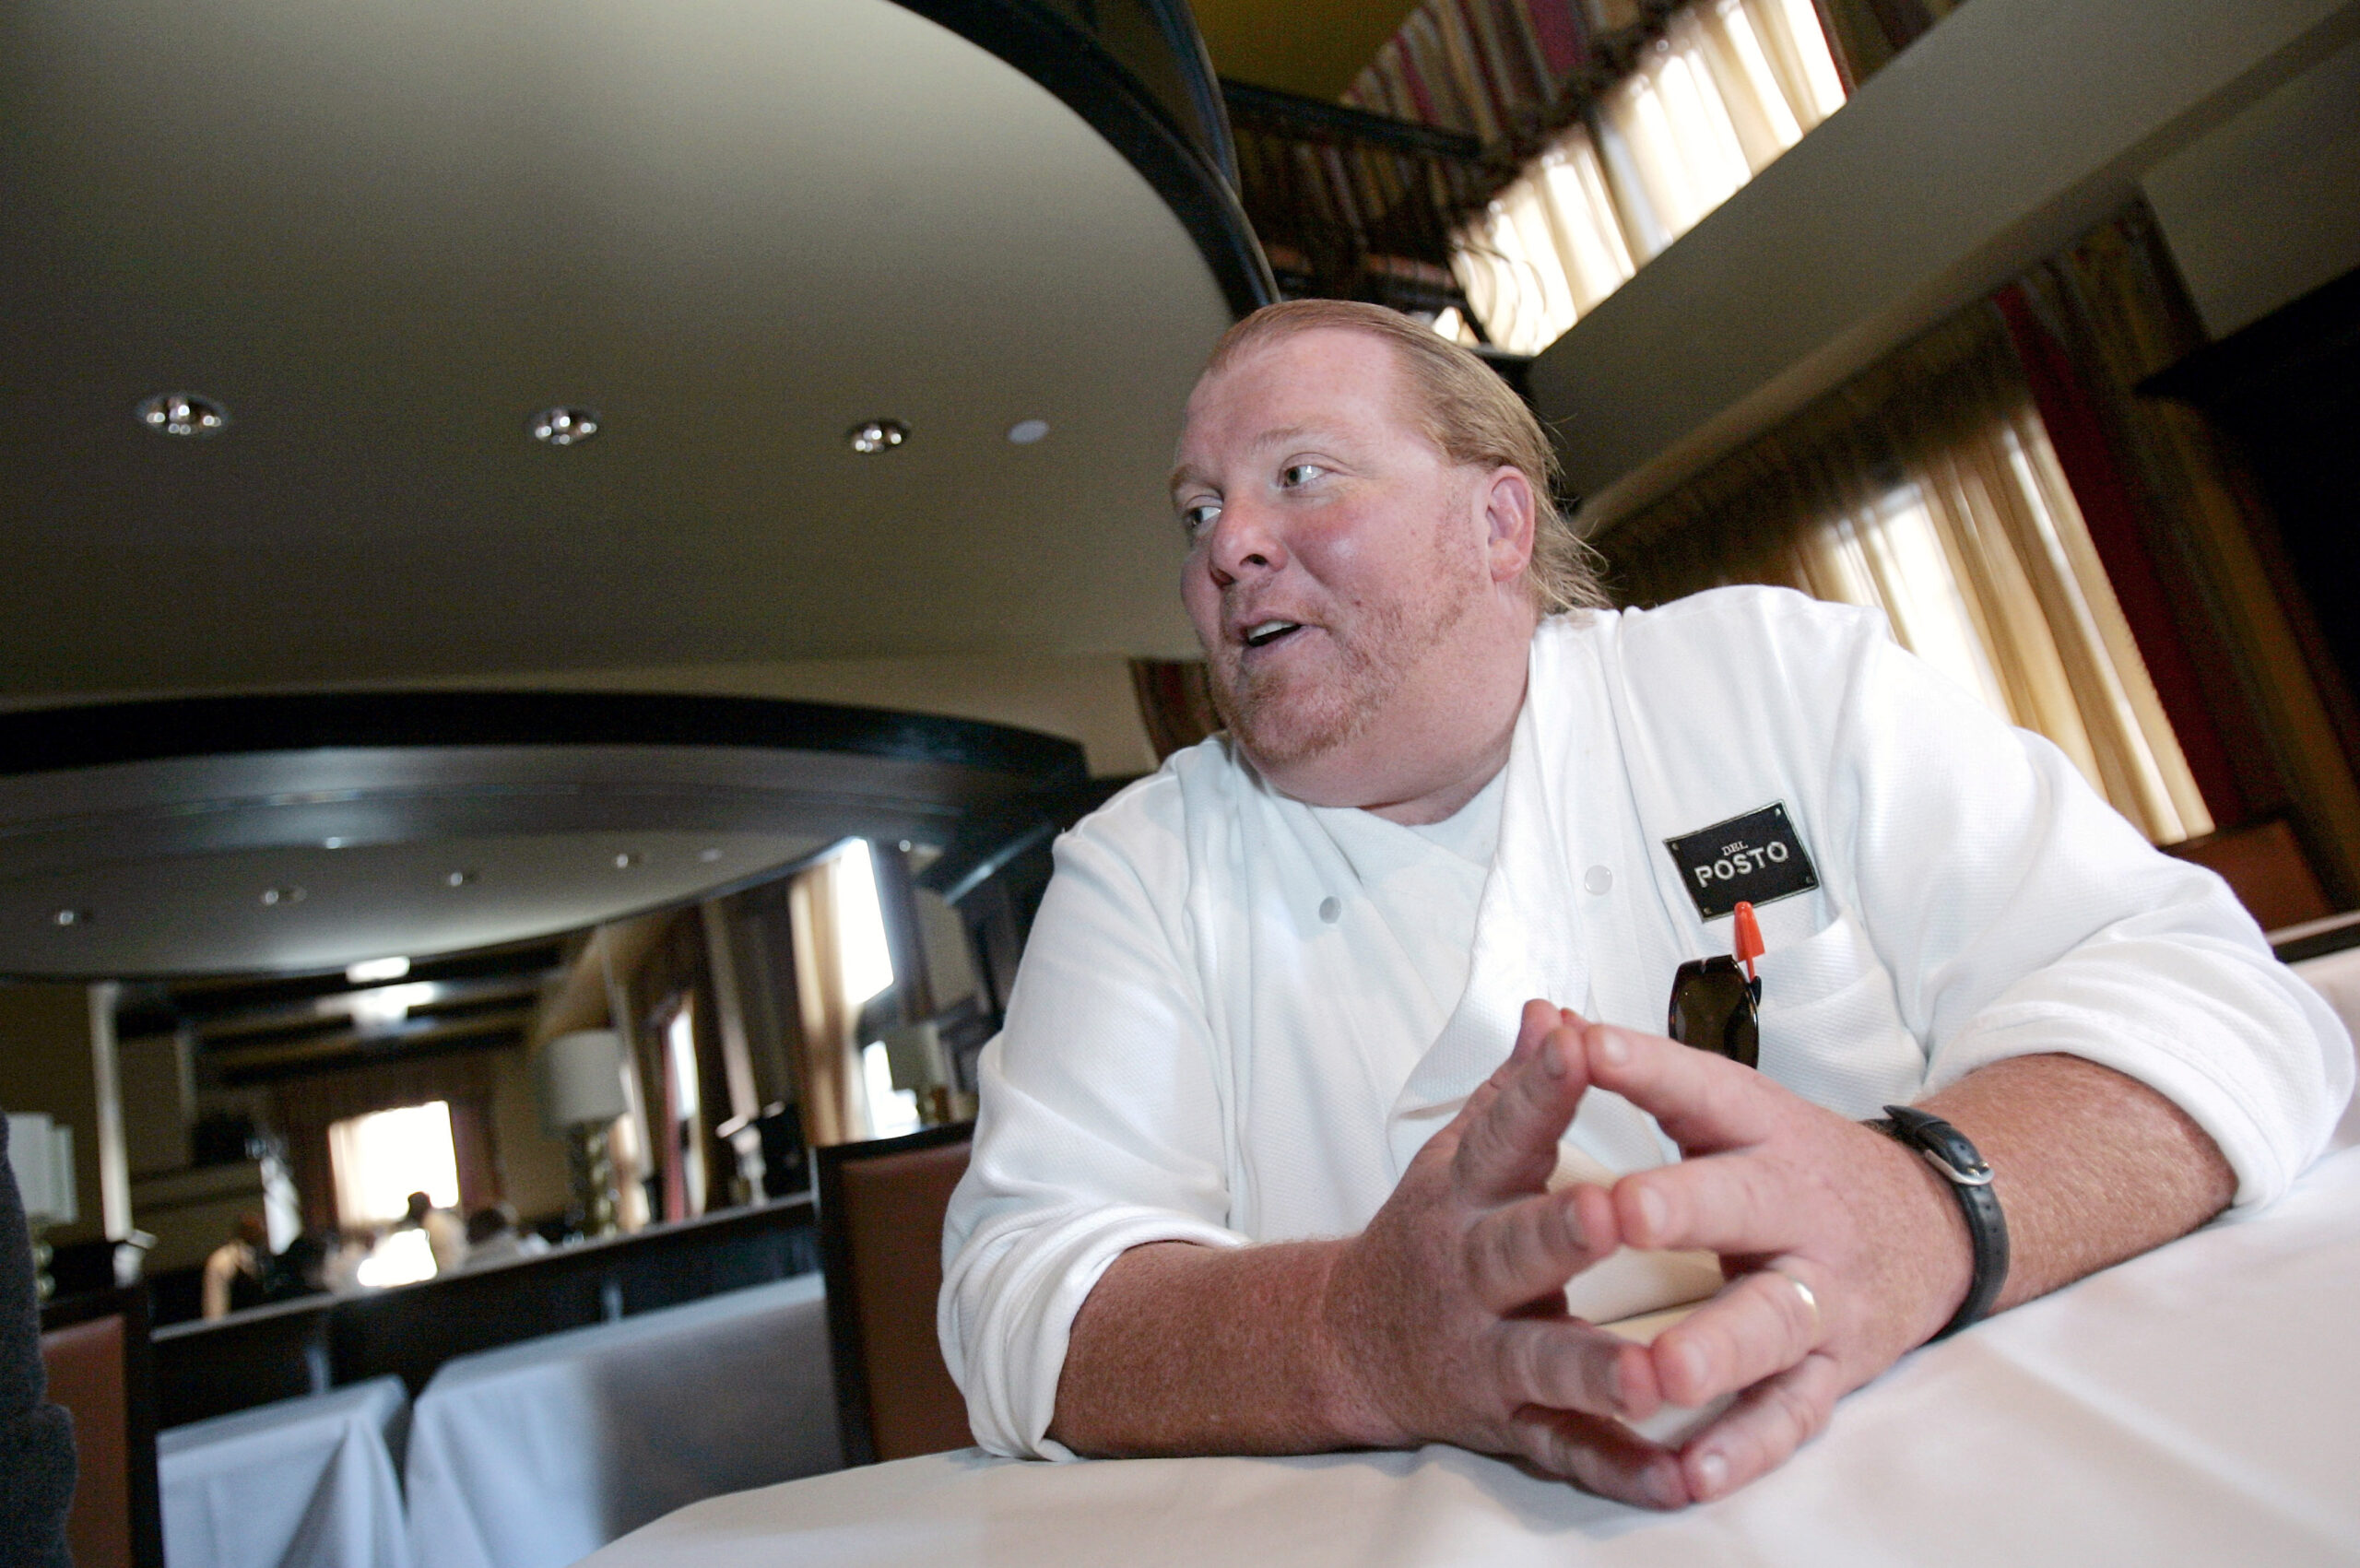 Celebrity chef Mario Batali talks during an interview with Reuters at his latest restaurant, Del Posto, in New York. Photo by Brendan McDermid/Reuters